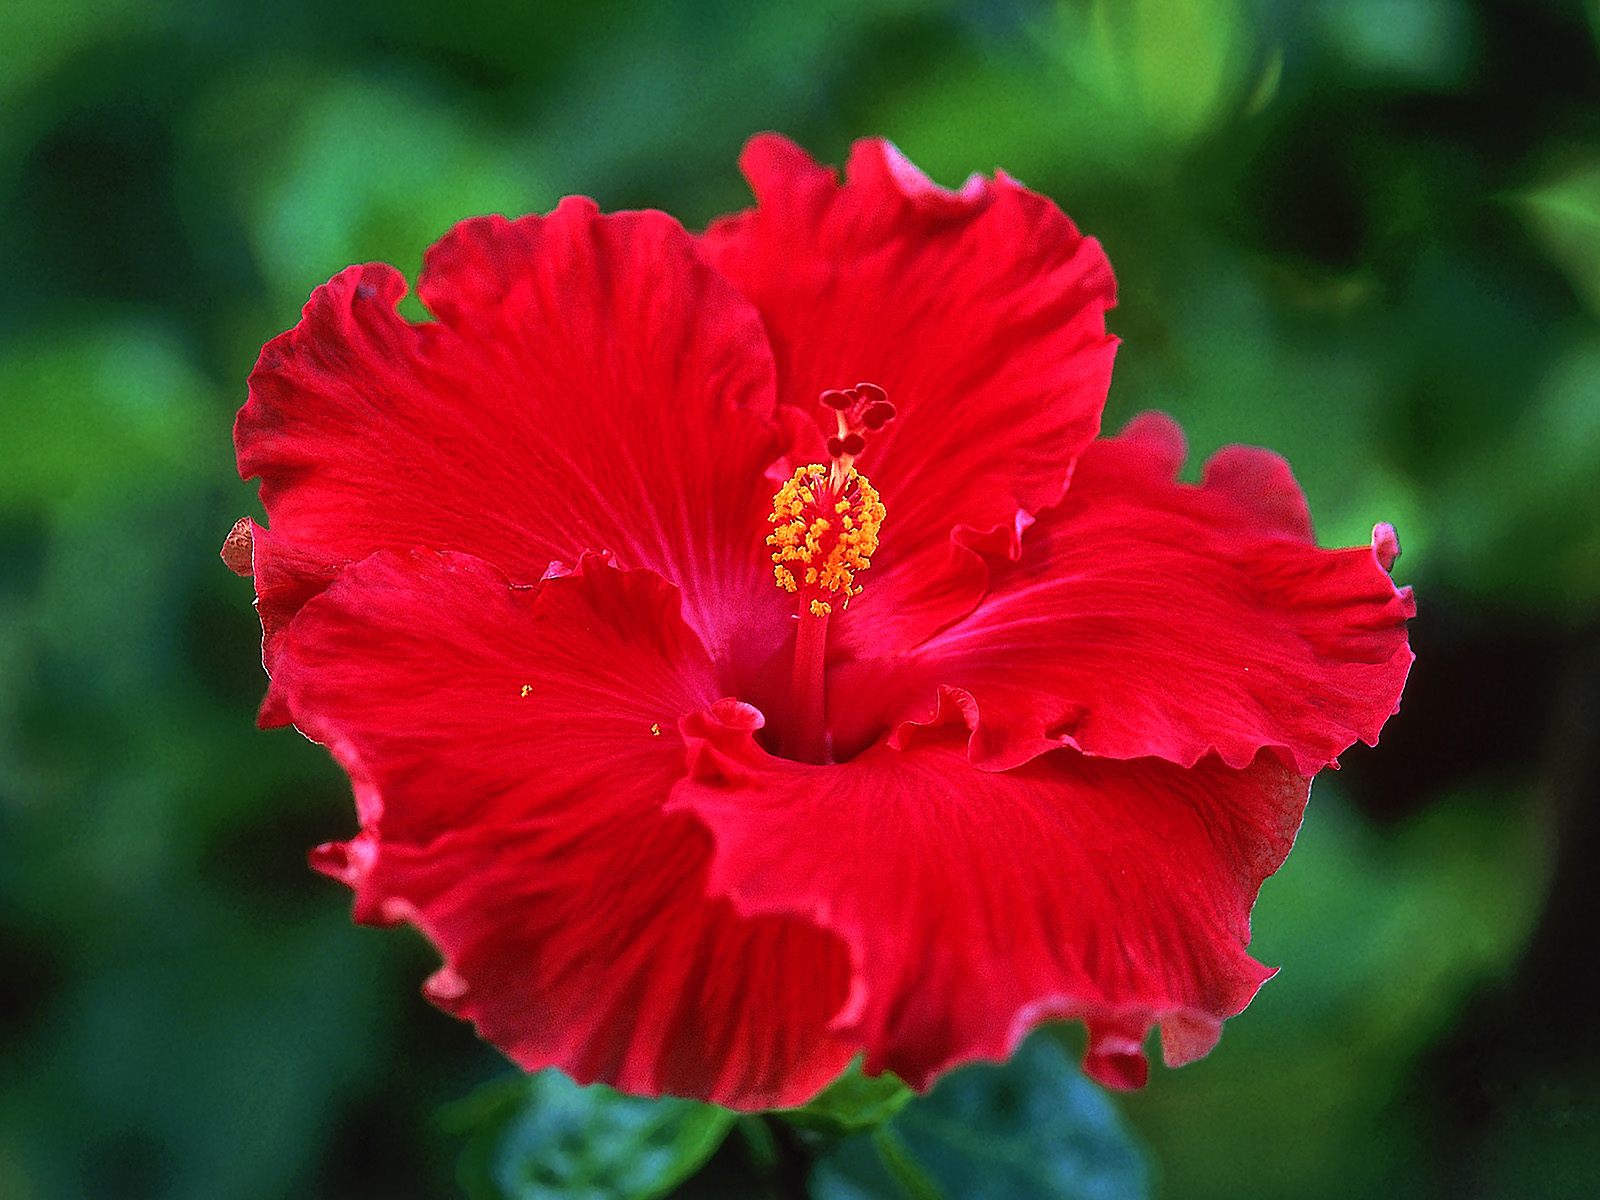 Hibiscus are beautiful flowers that seem to grow more in the northern part of the state. I tried growing some when I lived south of Fort Worth, ...